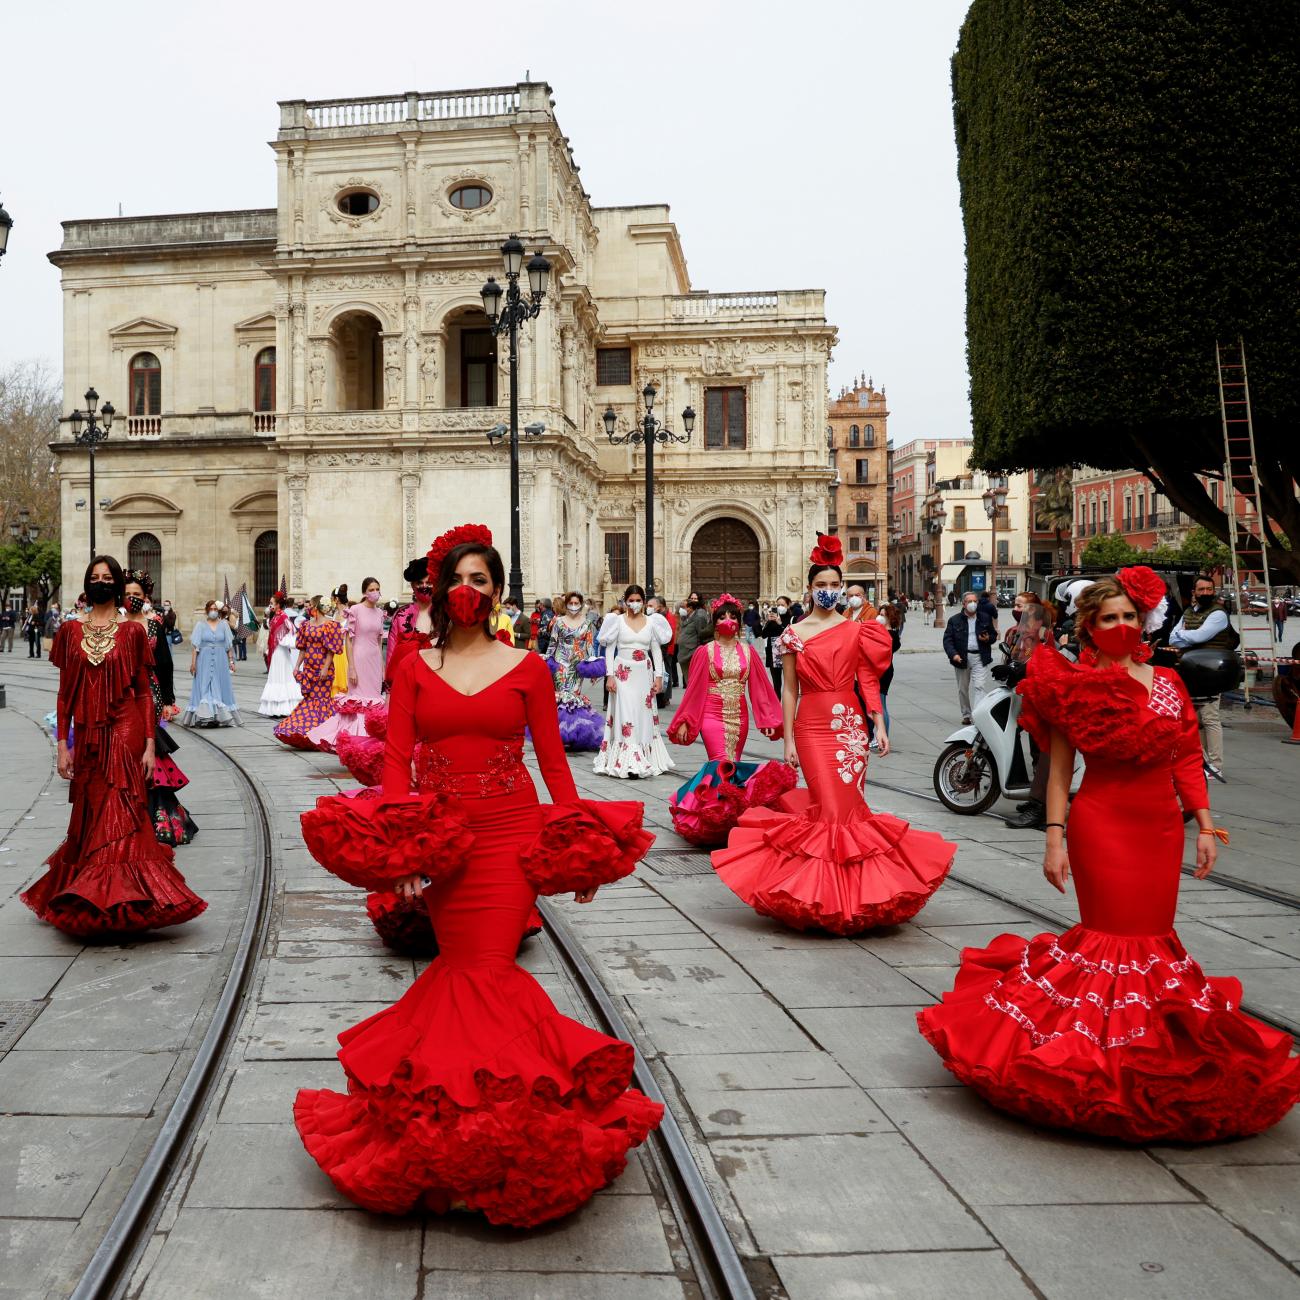 women dressed in traditional flamenco dresses walk in a city square 